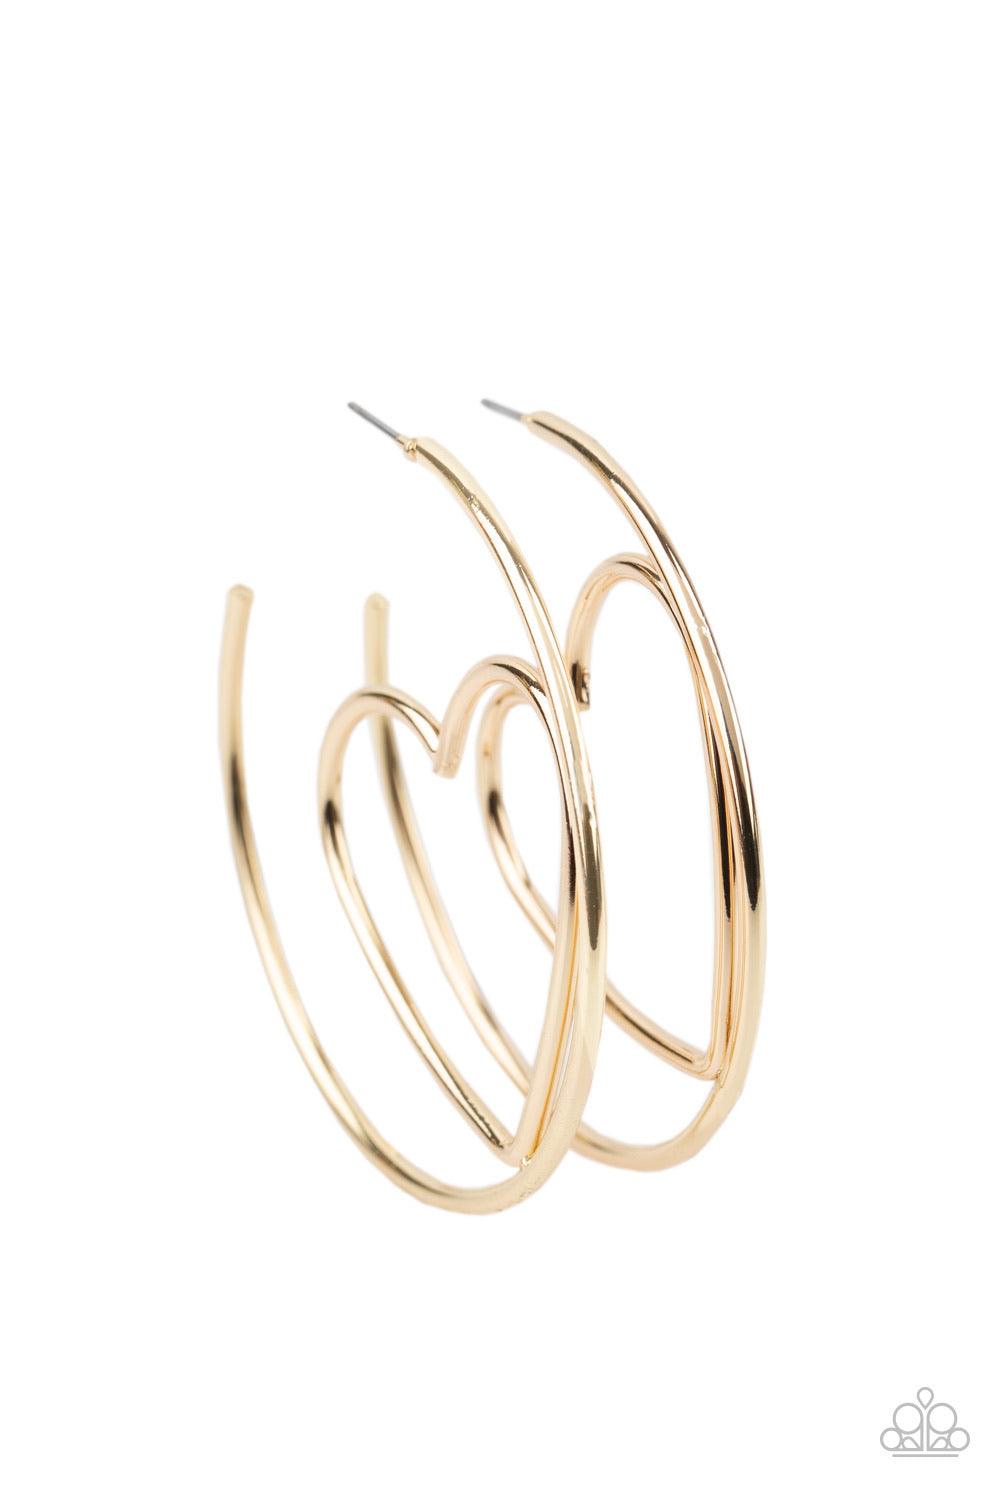 Paparazzi Accessories Love At First BRIGHT - Gold Glistening gold wire delicately bends into an airy heart frame inside a classic gold hoop, creating a flirtatious display. Earring attaches to a standard post fitting. Hoop measures approximately 2" in dia